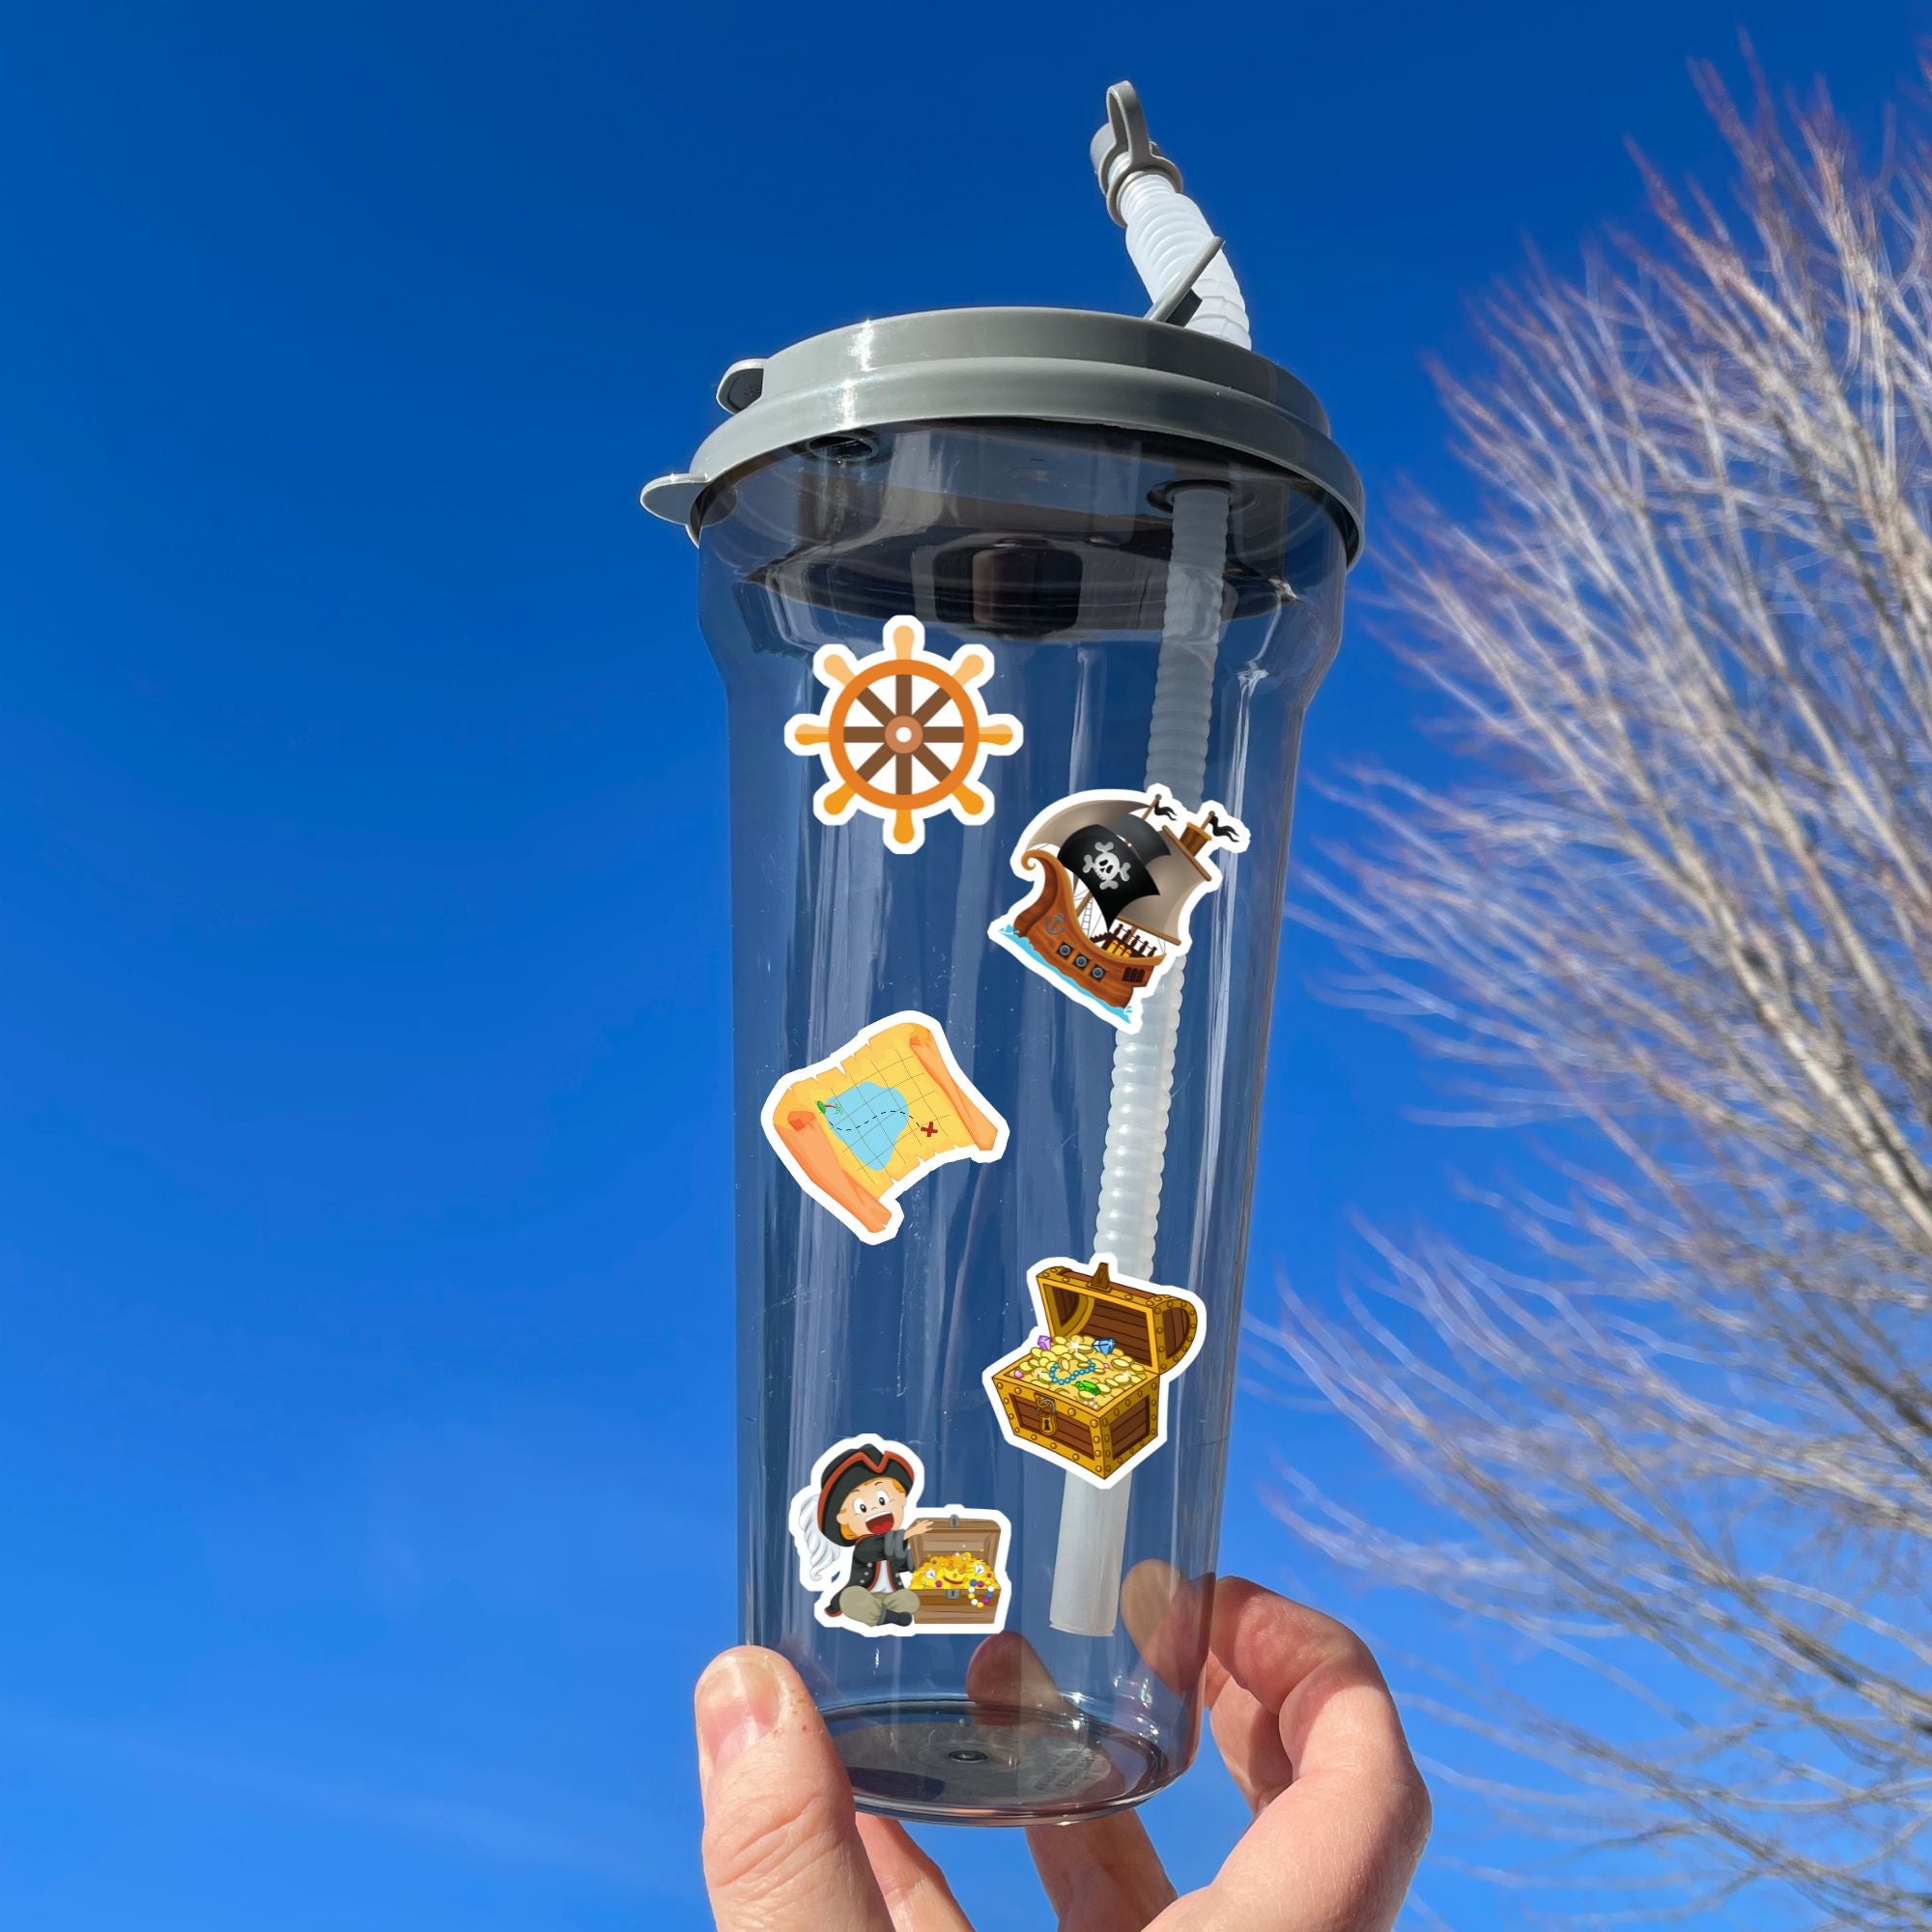 You'll walk the plank to get our A Pirates Life sticker sheet with individual stickers of treasure chests, treasure maps, pirate ships, pirates, and pirate creatures.  This is an image of a water bottle with stickers on it.